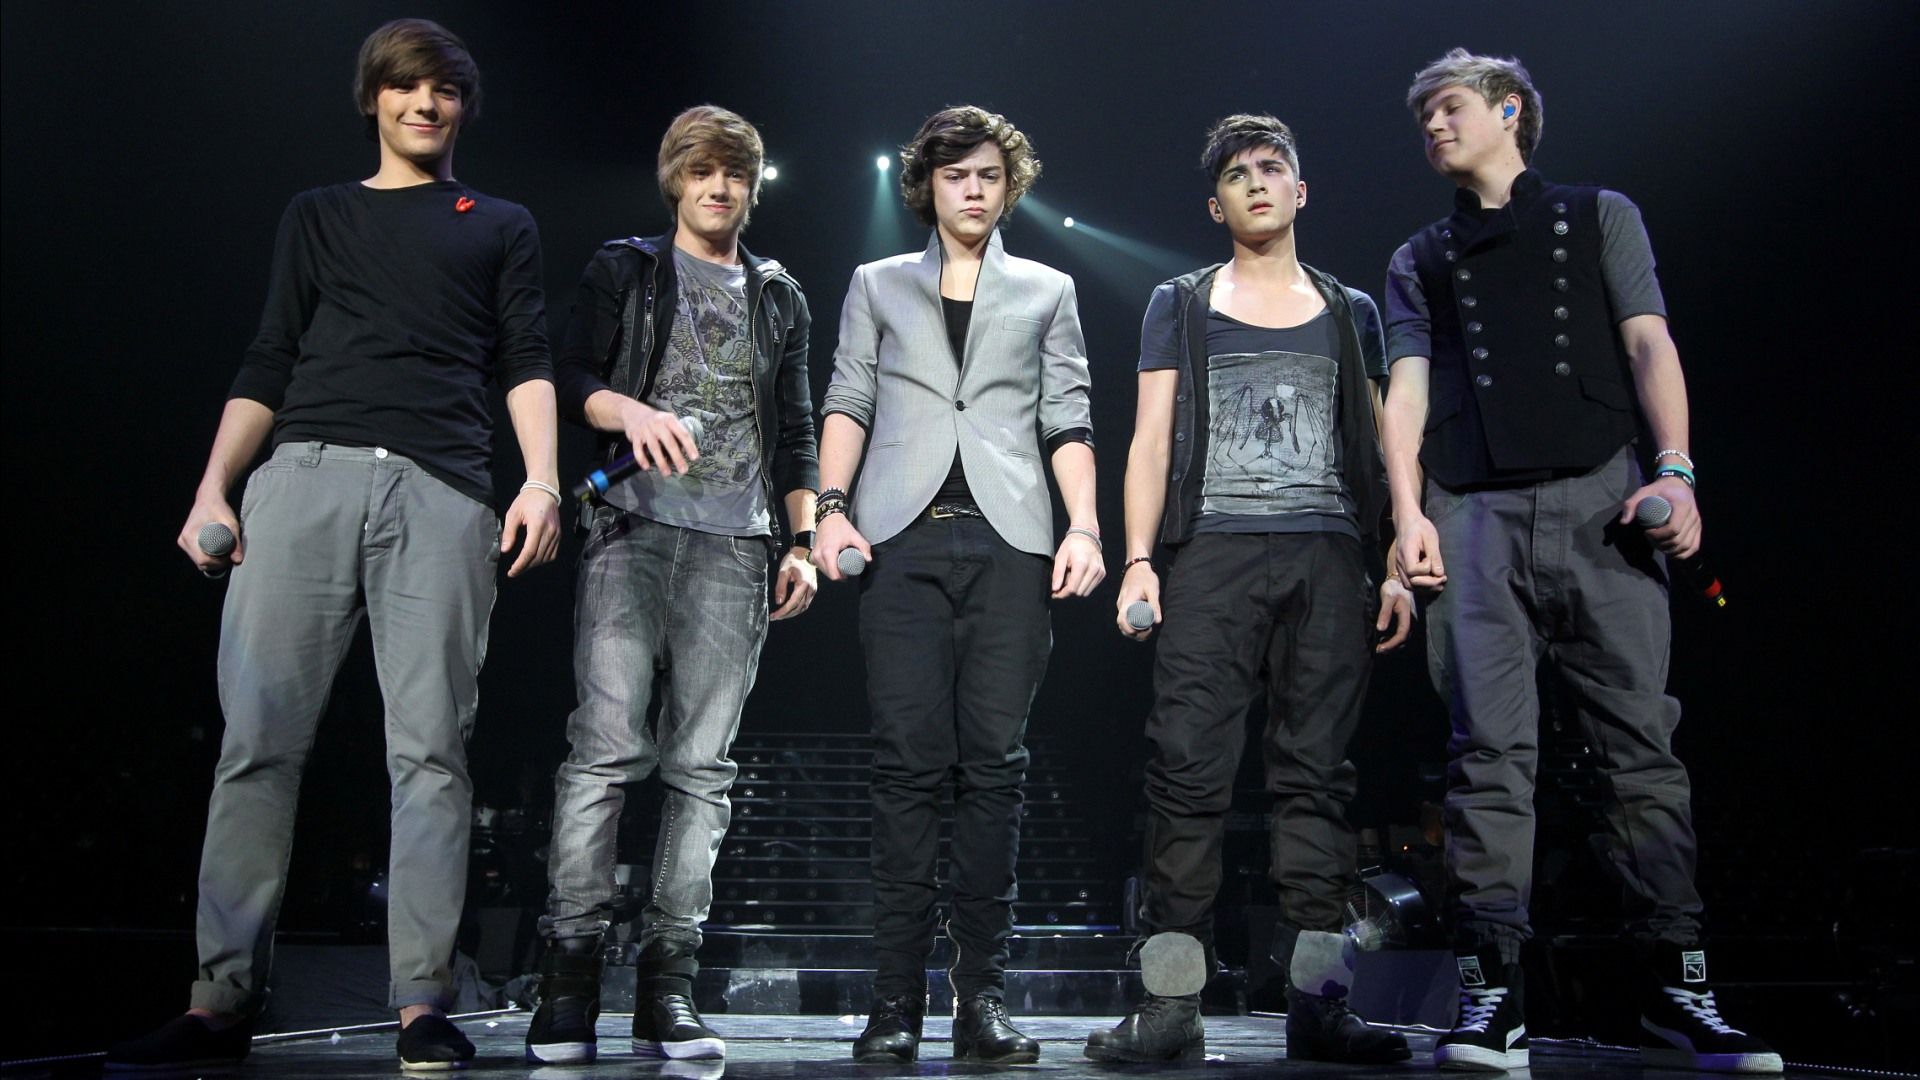 Free download one direction one direction Desktop Background